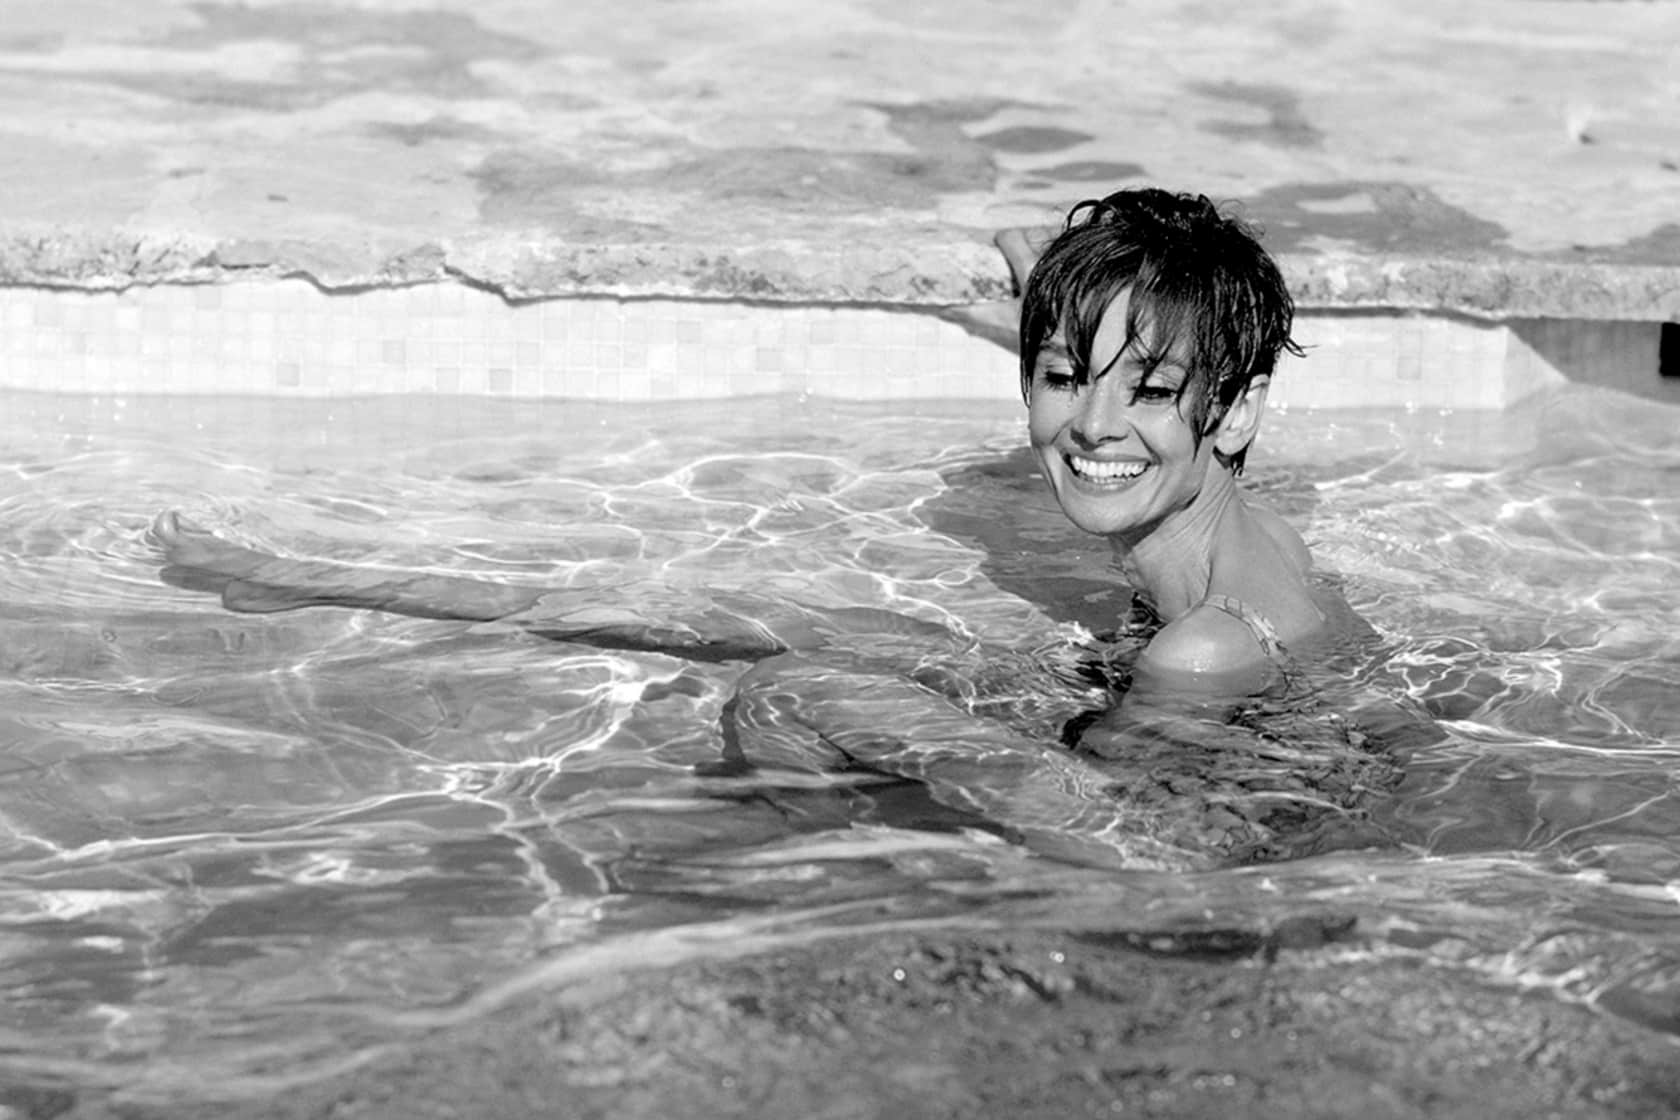 Terry O'Neill, Audrey Hepburn in Pool, Black & White, 1966